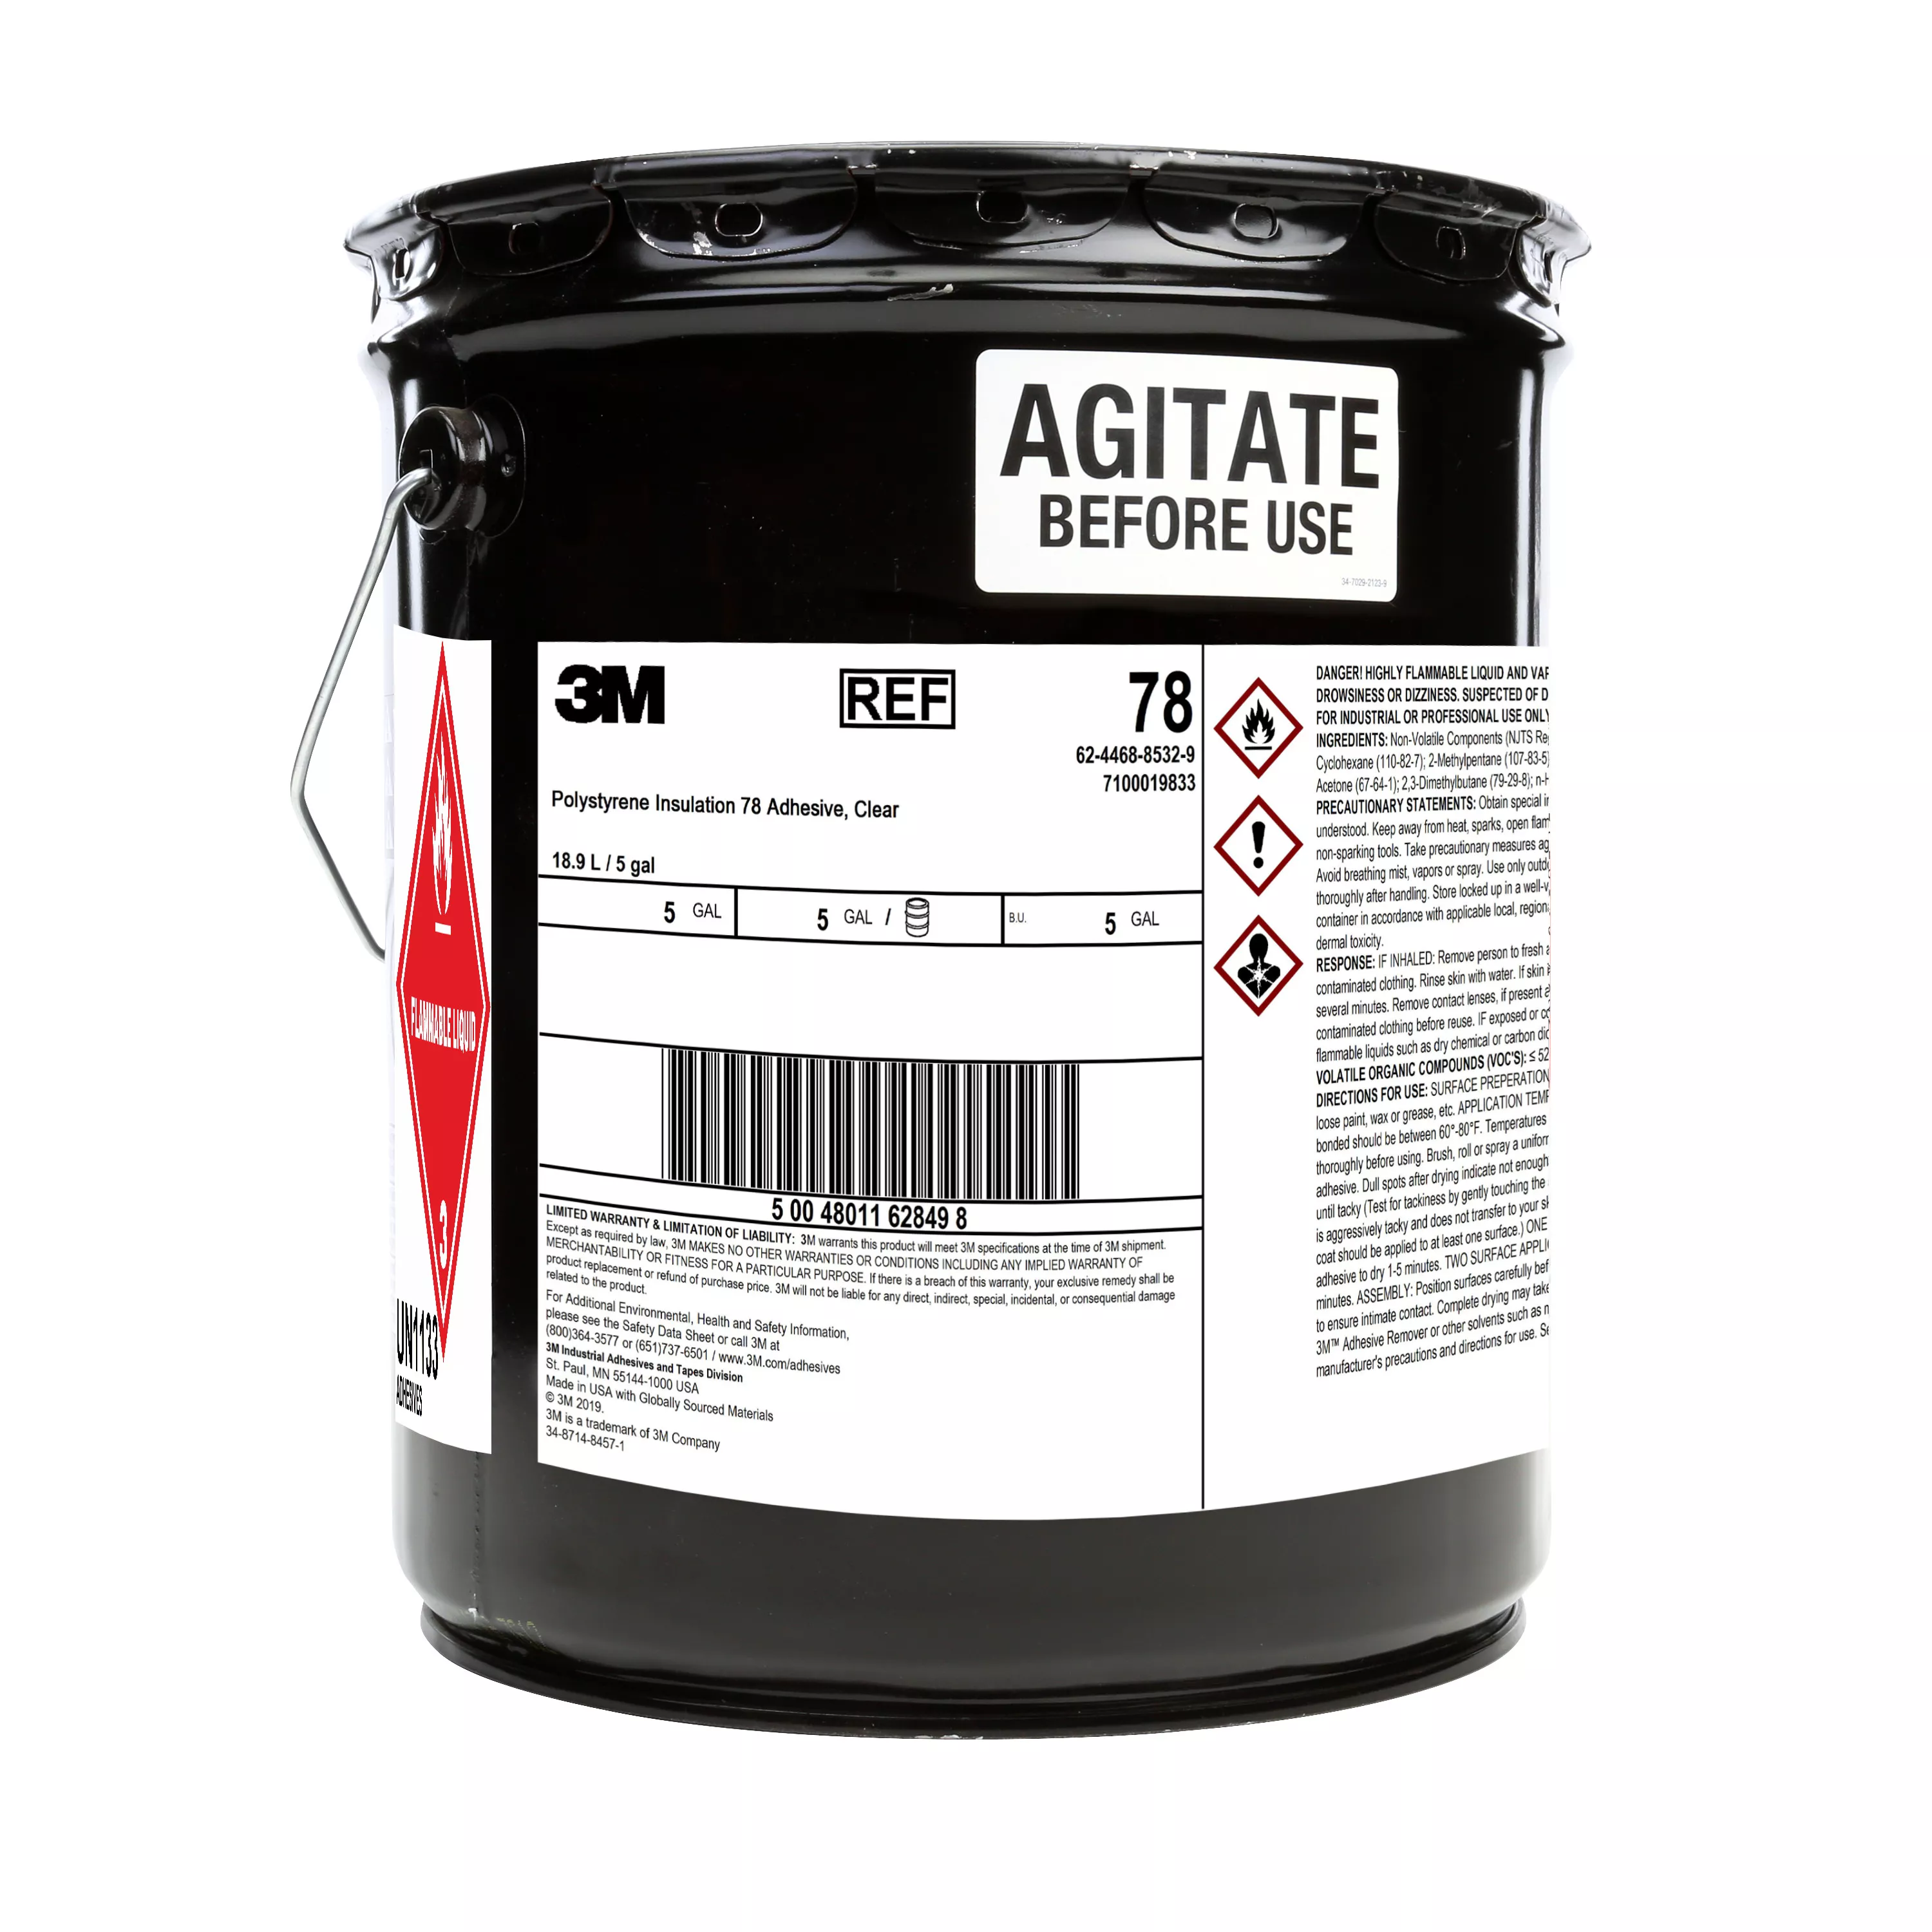 3M™ Polystyrene Insulation Adhesive 78, Clear, 5 Gallon (Pail), 1
Can/Drum